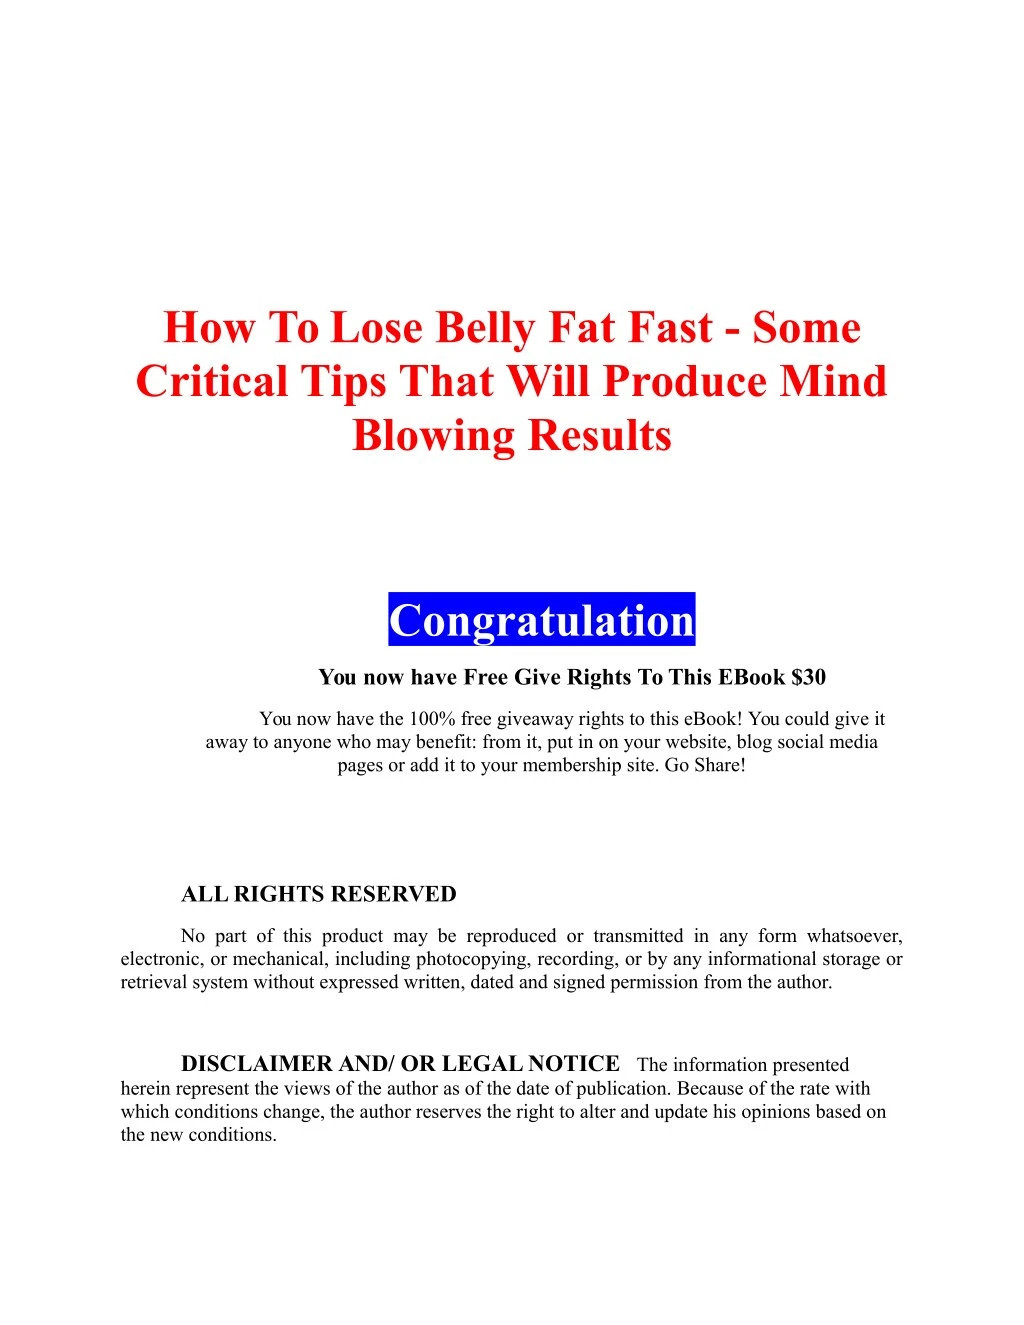 how to lose belly fat fast some critical tips